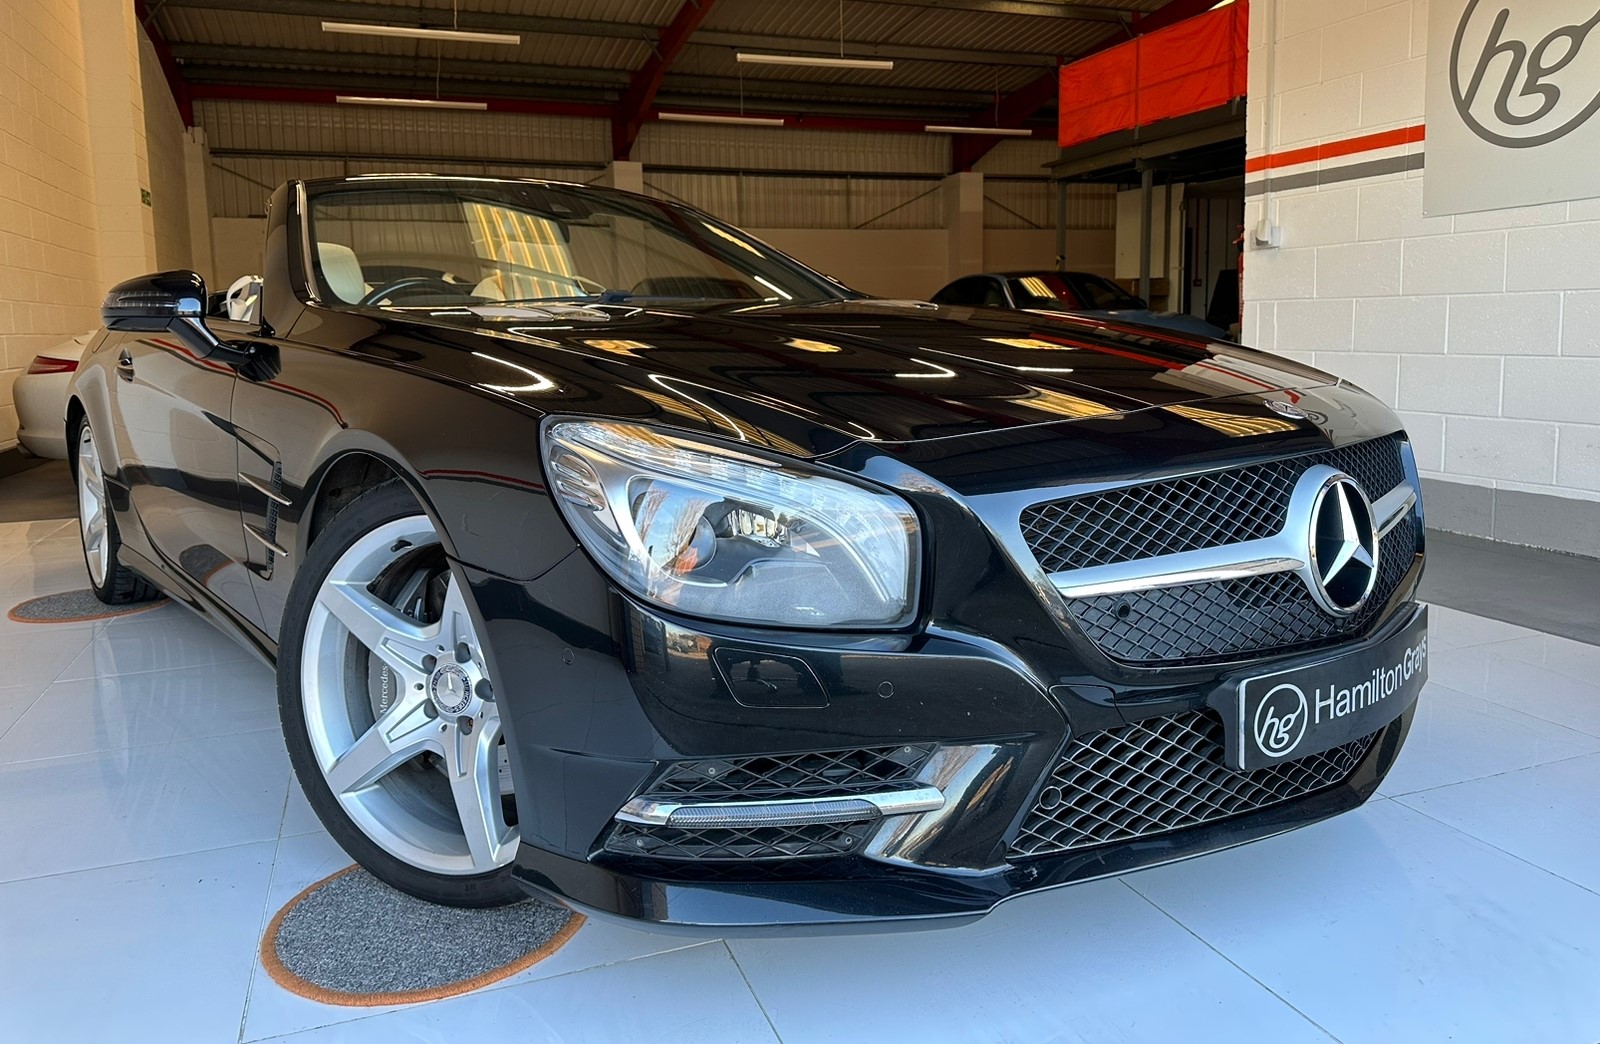 2013 (63) Mercedes-Benz SL Class 3.5 SL350 AMG Sport 7G-Tronic Convertible. Finished in Obsidian Black with Designo Platinum White Pearl Upholstery. FMBSH. 48k.. Great Spec’   £21,950